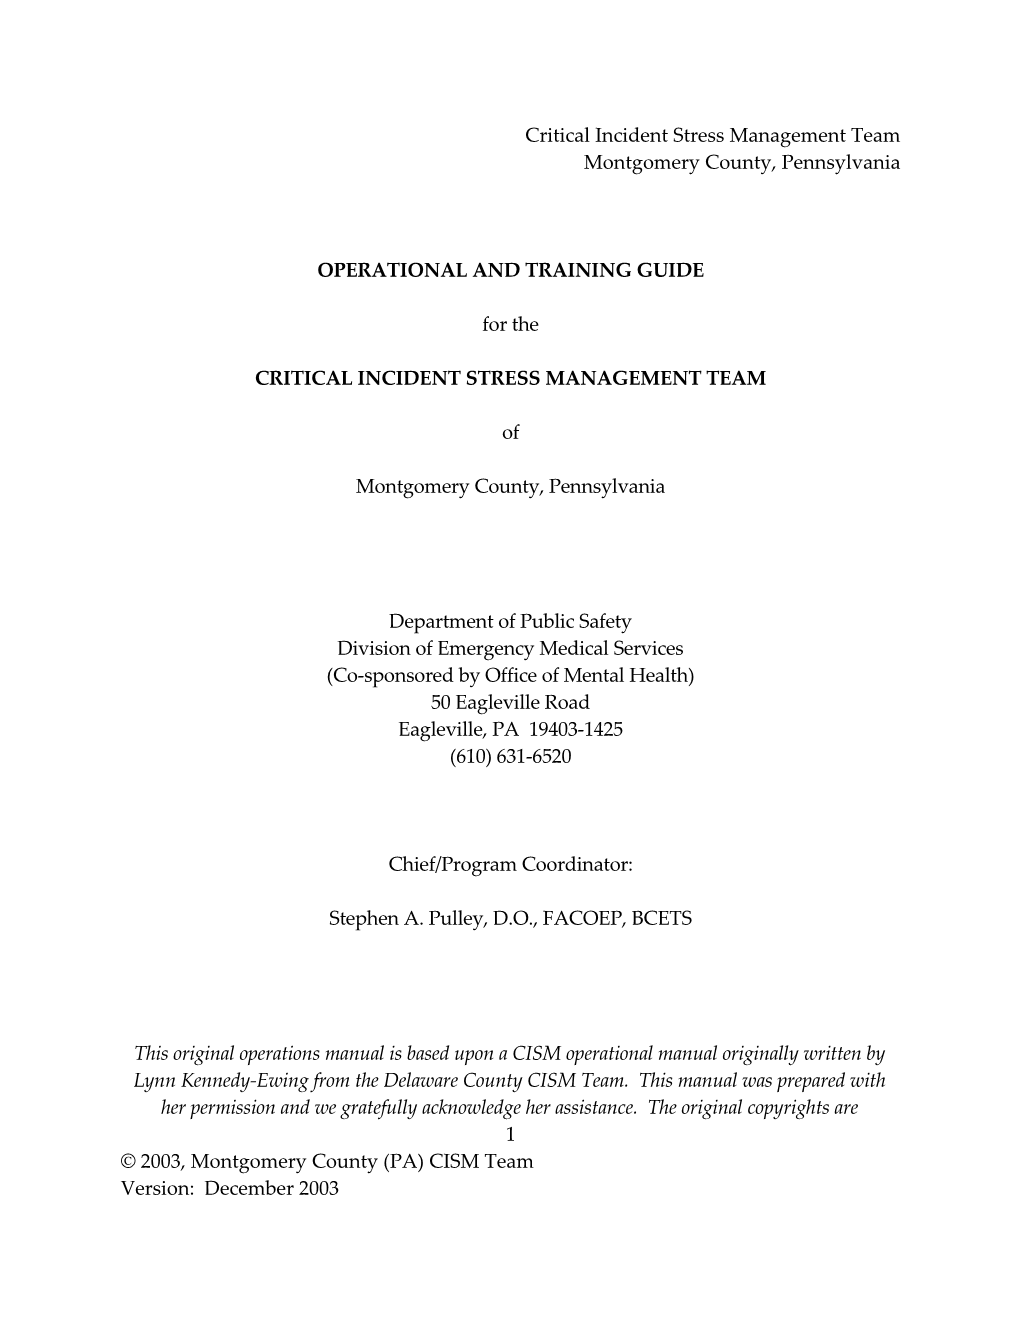 Montco CISM Operations Manual and Training Guide